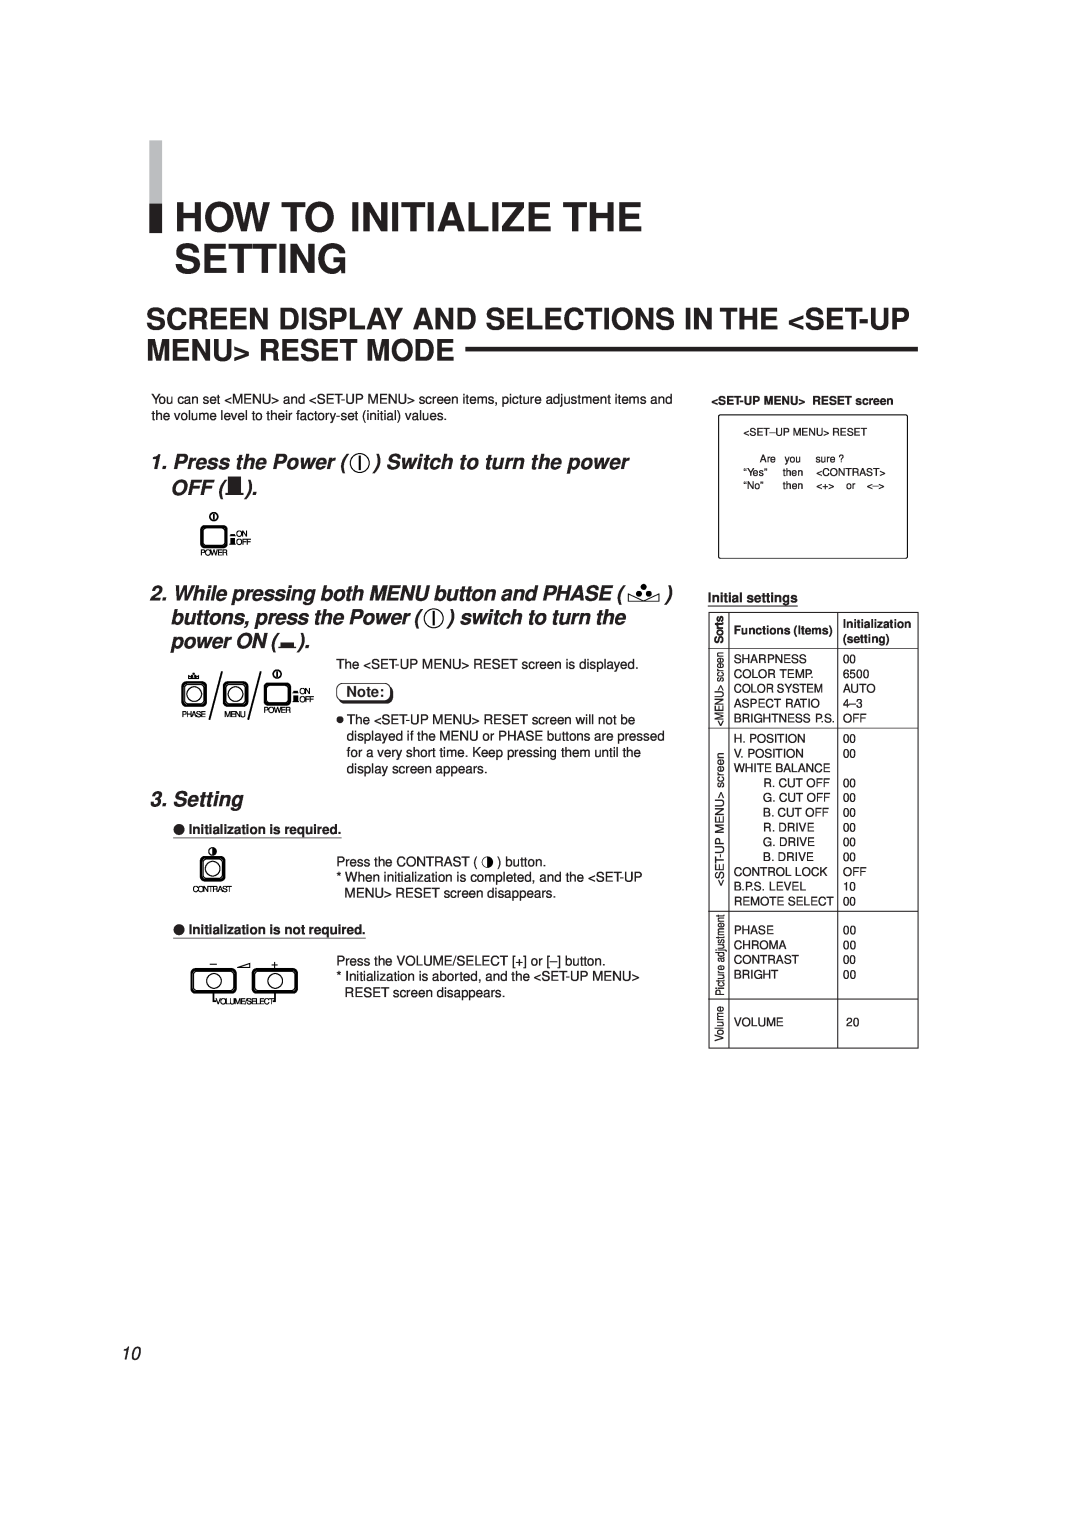 JVC TM-2000SU manual How To Initialize The Setting, Screen Display And Selections In The Set-Up Menu Reset Mode, power ON 